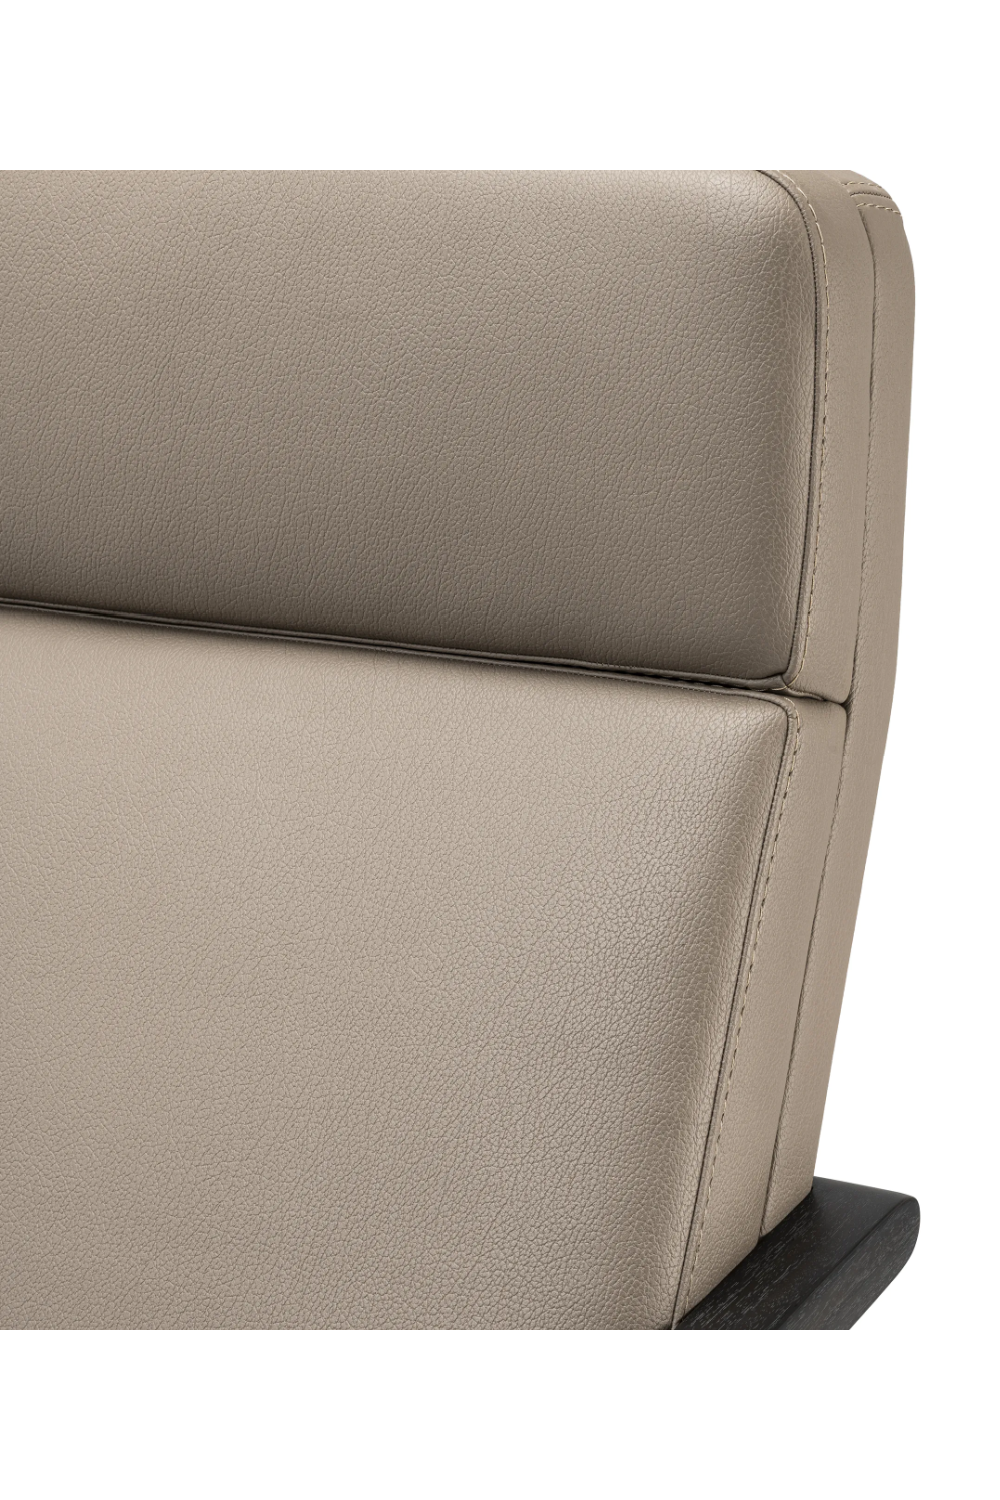 Gray Leather Look Accent Chair | Eichholtz Cruise | Oroa.com